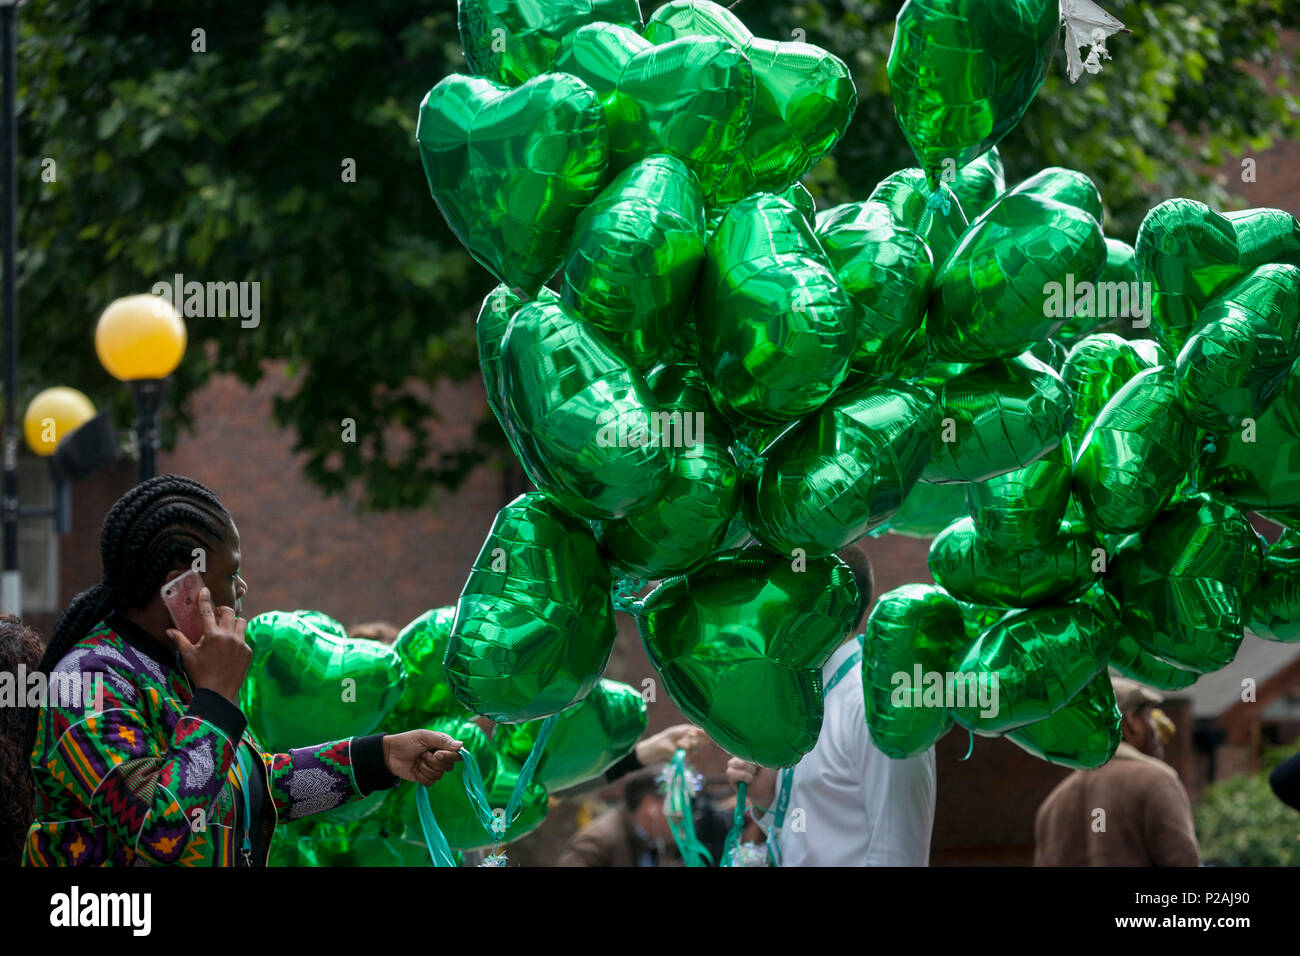 London, UK. 14th Jun, 2018.  Green heart-shaped balloons during the memorial service for the Grenfell fire on the first anniversary of the tower block disaster. 72 people died when the tower block in the borough of Kensington & Chelsea were killed in what has been called the largest fire since WW2. The 24-storey Grenfell Tower block of public housing flats in North Kensington, West London, United Kingdom. It caused 72 deaths, out of the 293 people in the building, including 2 who escaped and died in hospital. Over 70 were injured and left traumatised. Credit: RichardBaker/Alamy Live News Stock Photo